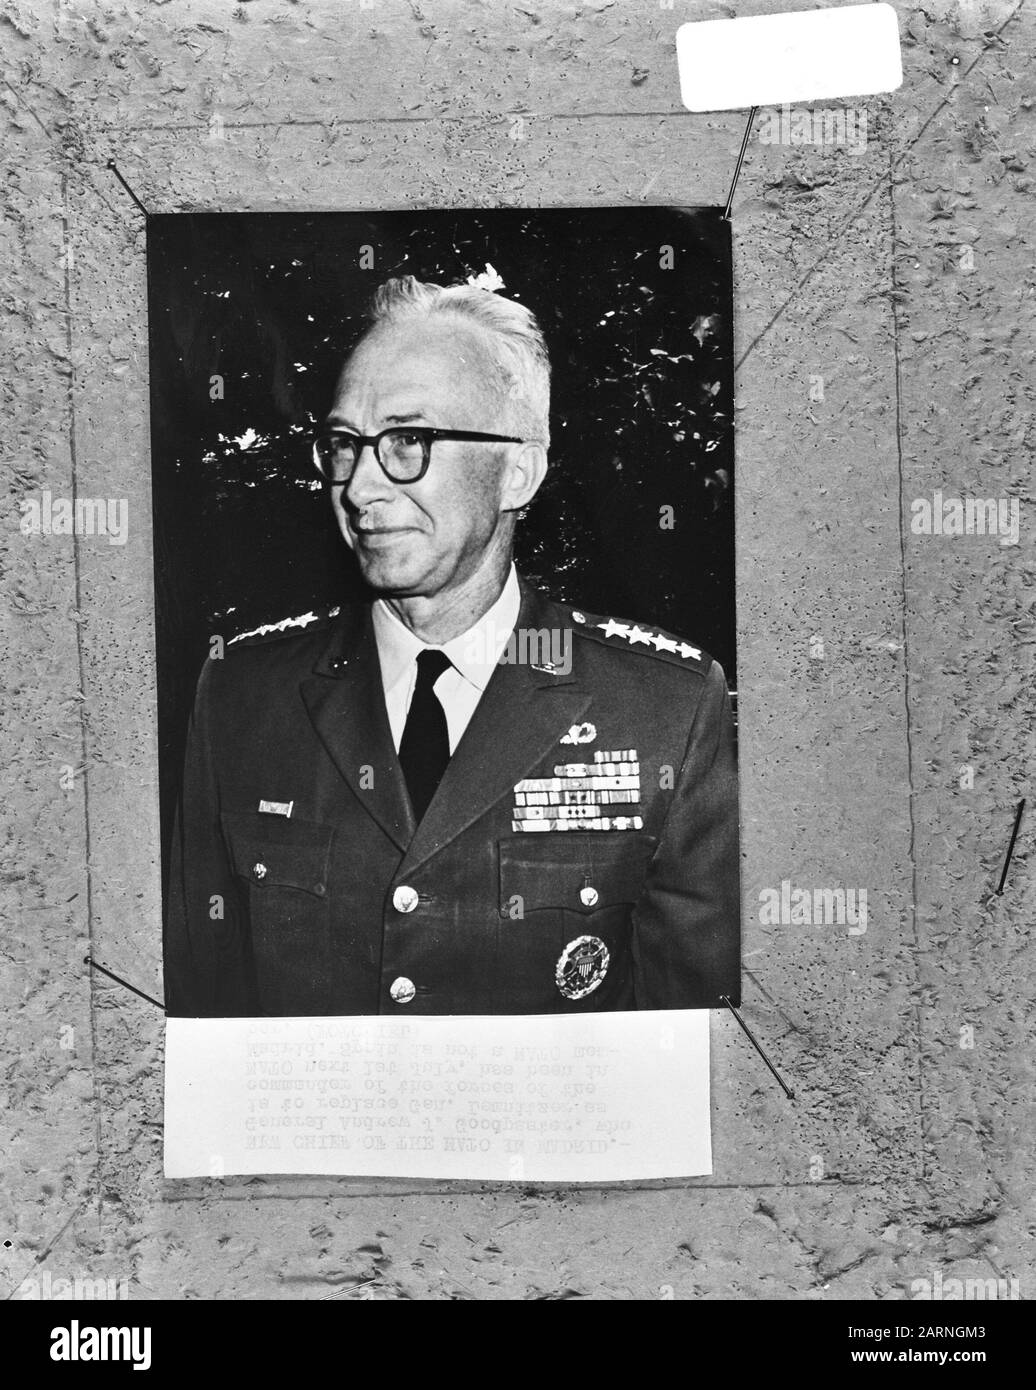 General Andrew J. Goodpaster, the new commander of NATO in Europe Date: June 23, 1969 Location: Europe Keywords: Commander-in-chief Personal name: Goodpaster, A.J. Stock Photo